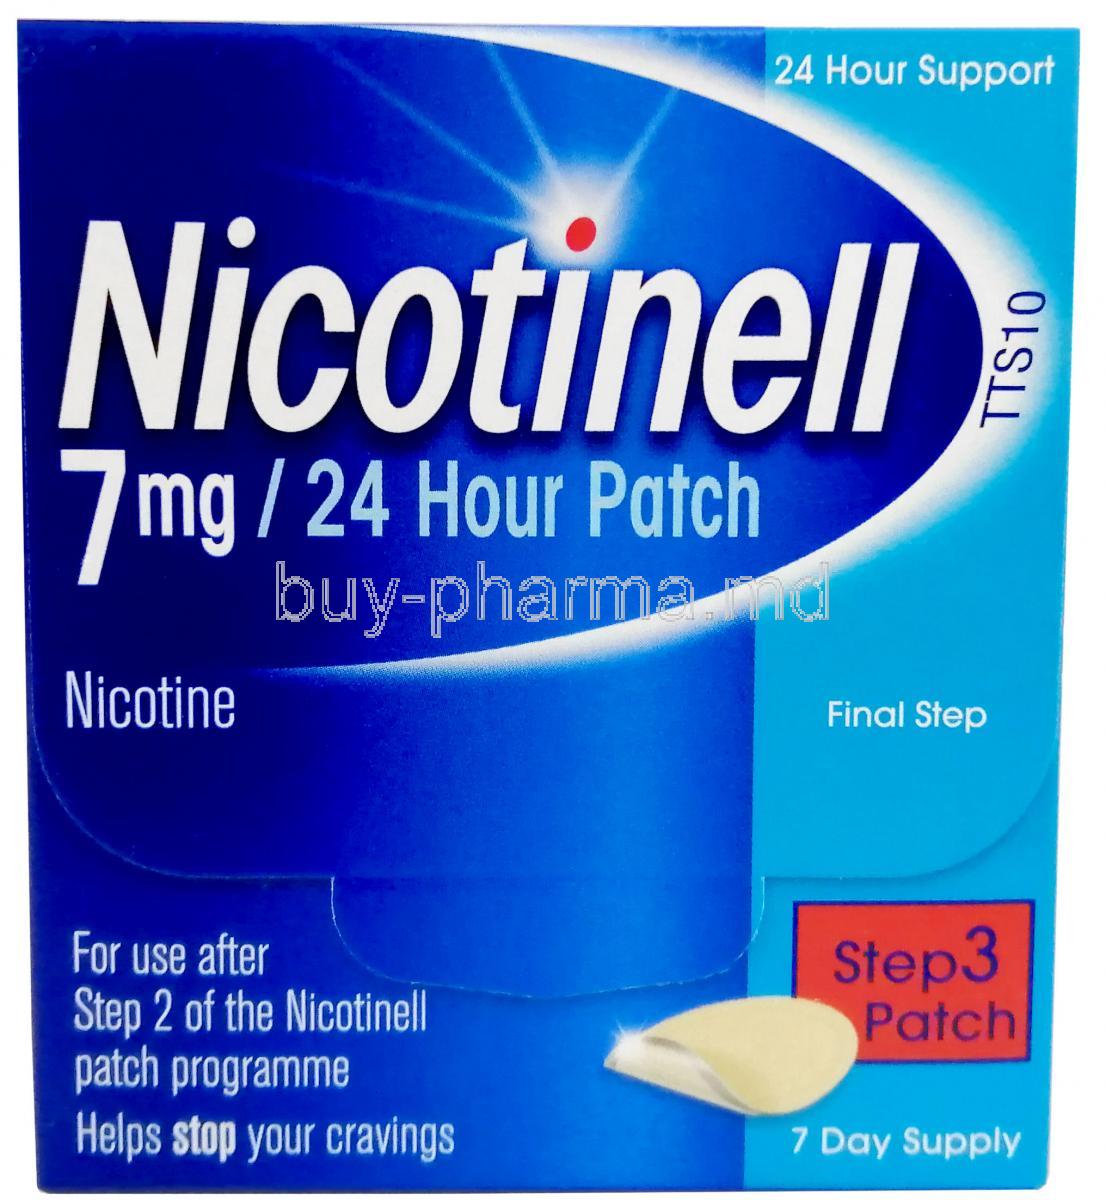 Nicotinell Patch, Nicotine, 7mg/24 hour, 7 Patches, GSK, Box front view